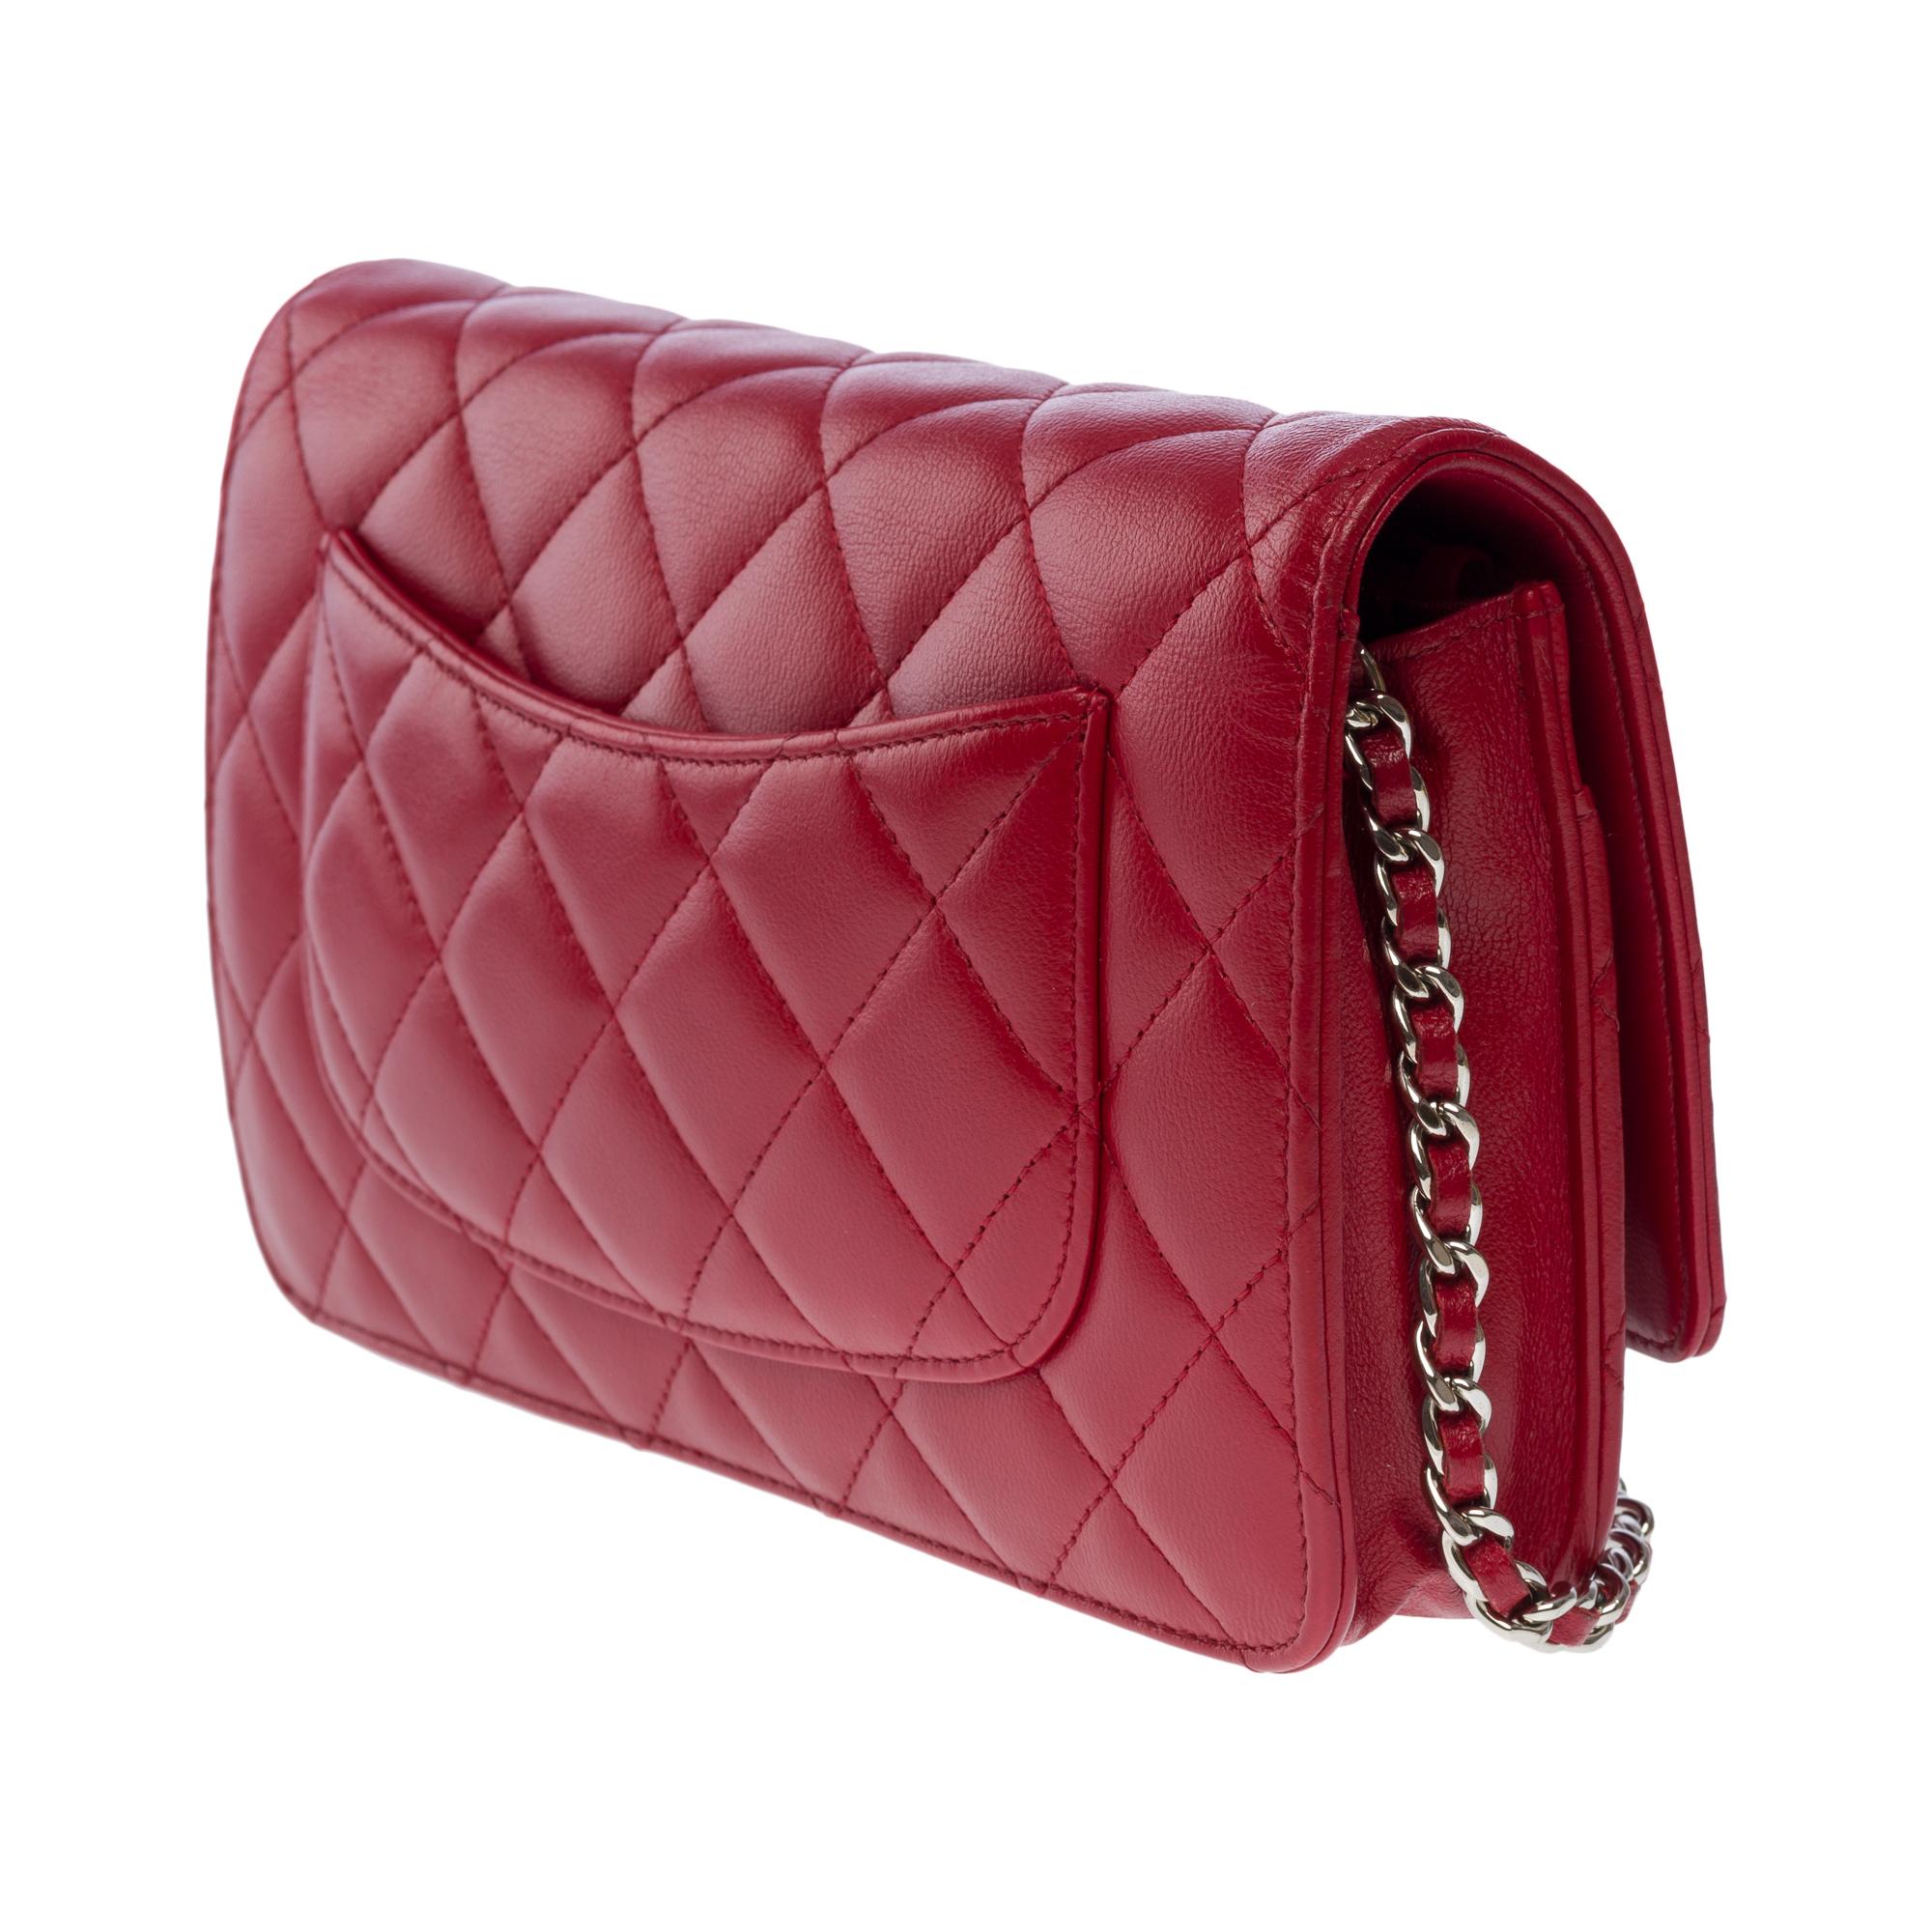 Chanel Wallet on Chain (WOC)  shoulder bag in Red quilted lambskin leather, GHW 1